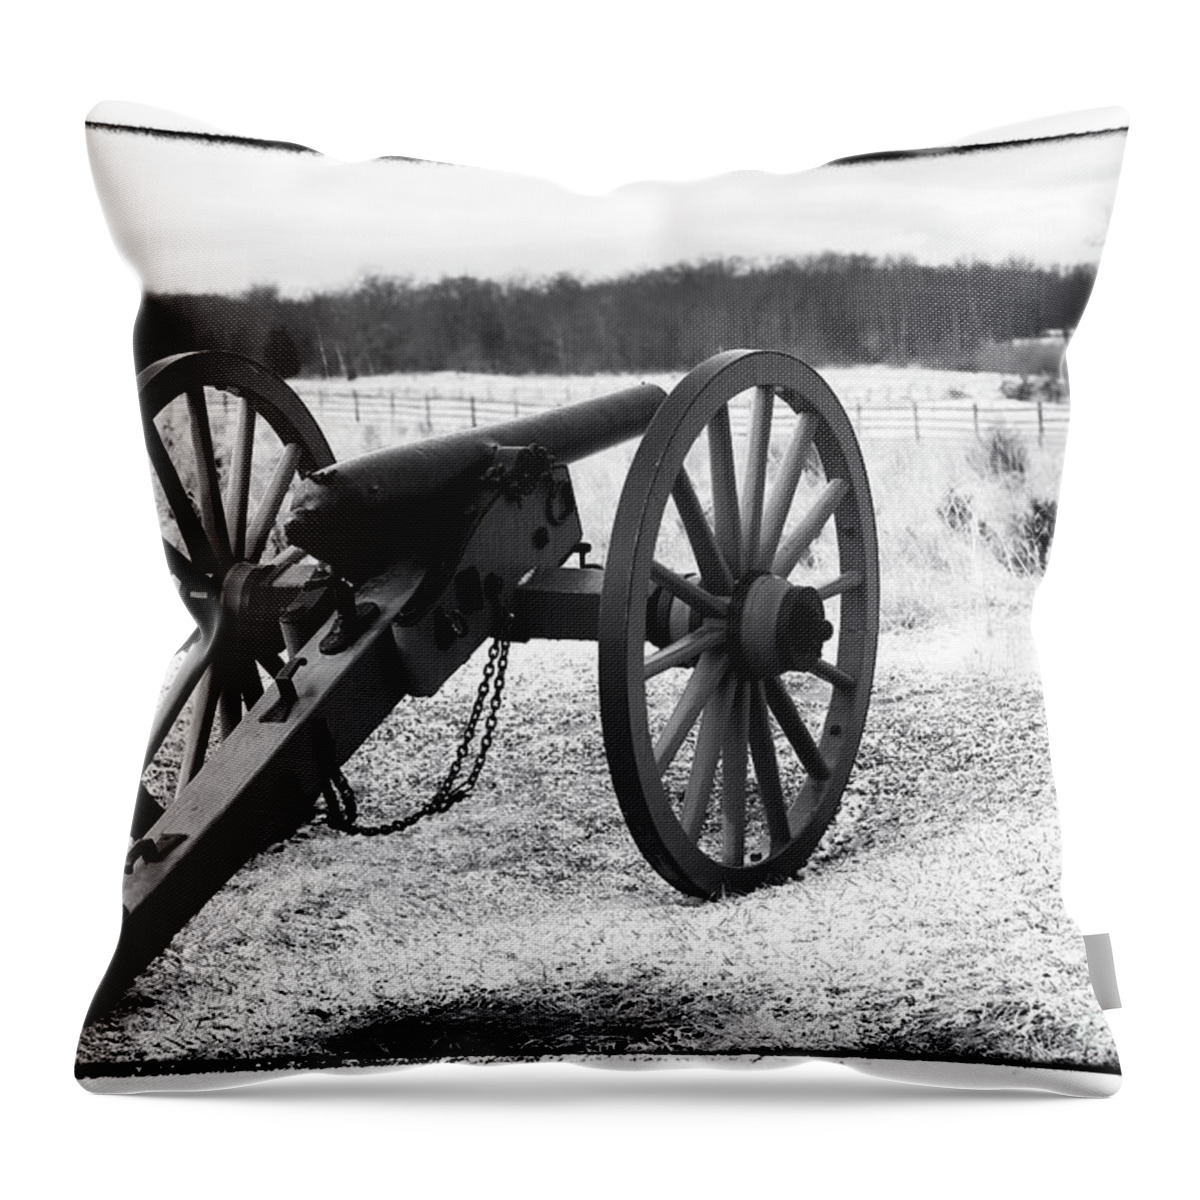 Winter Campaign Throw Pillow featuring the photograph Winter Campaign by John Rizzuto